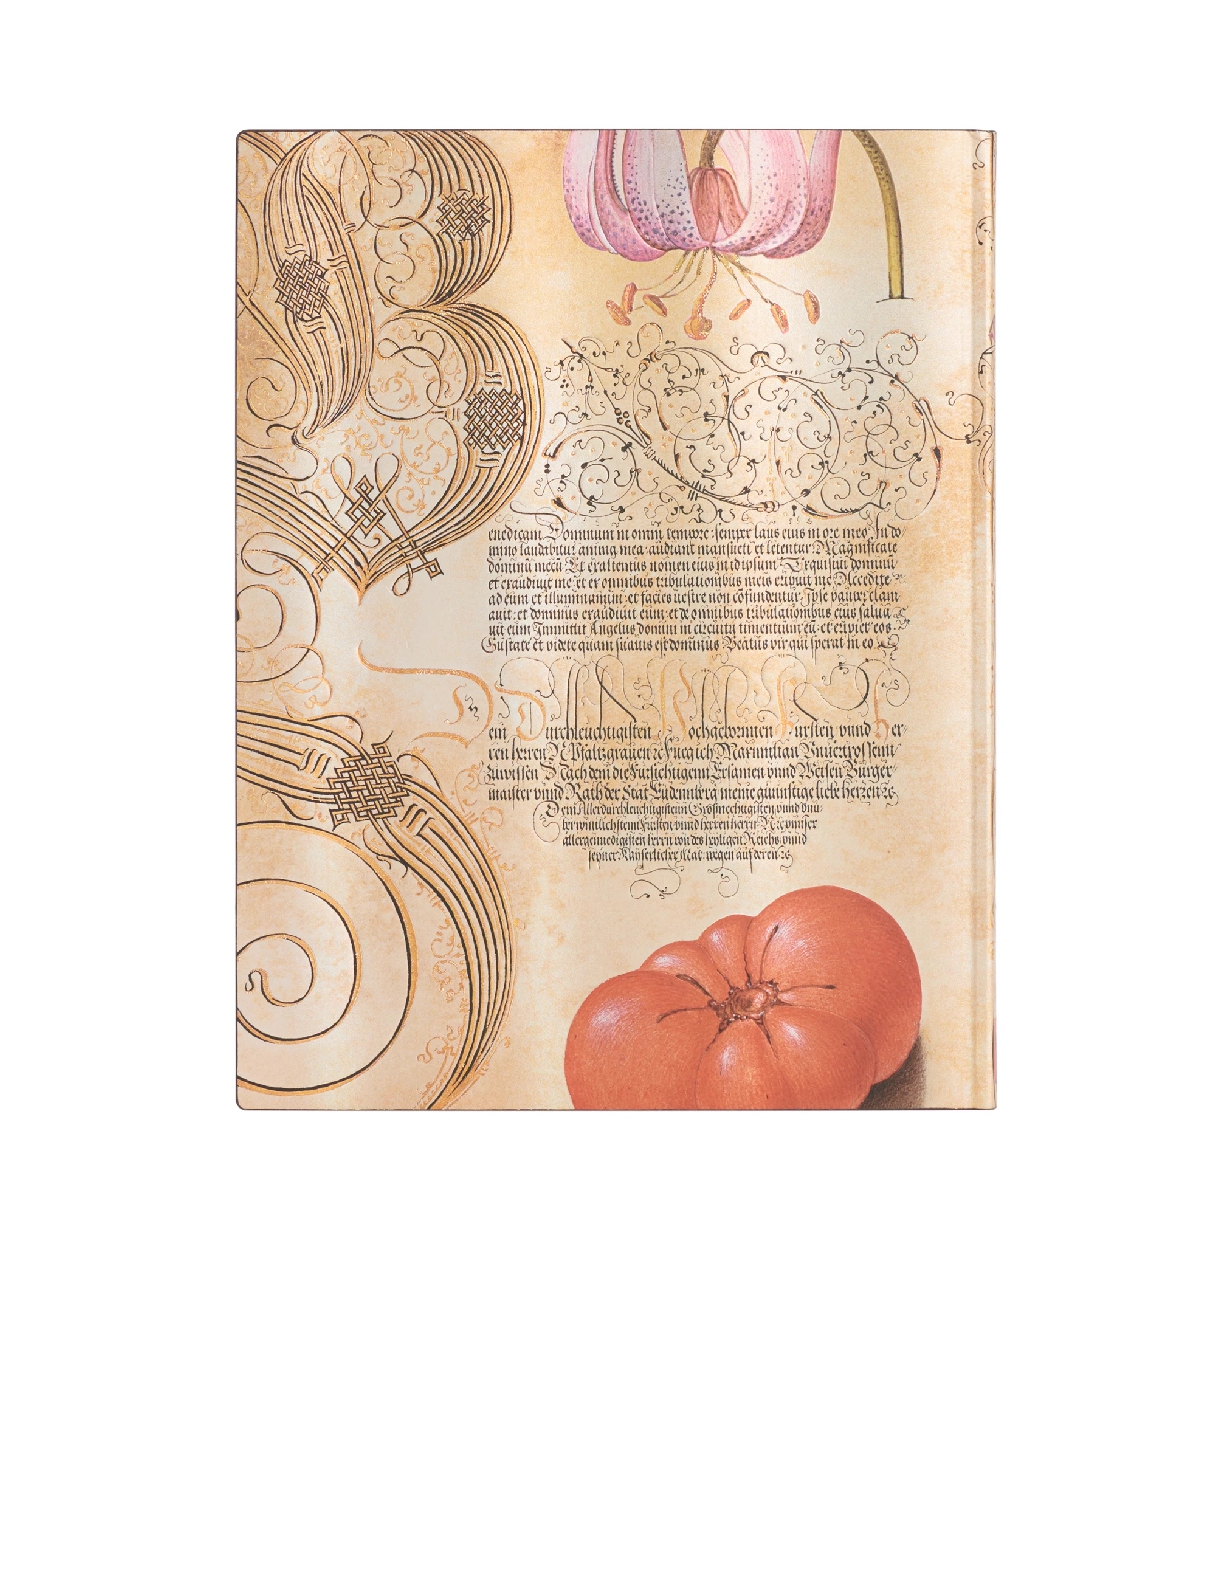 Lily & Tomato, Mira Botanica, Softcover Flexi, Ultra, Unlined, 176 Pg, 100 GSM